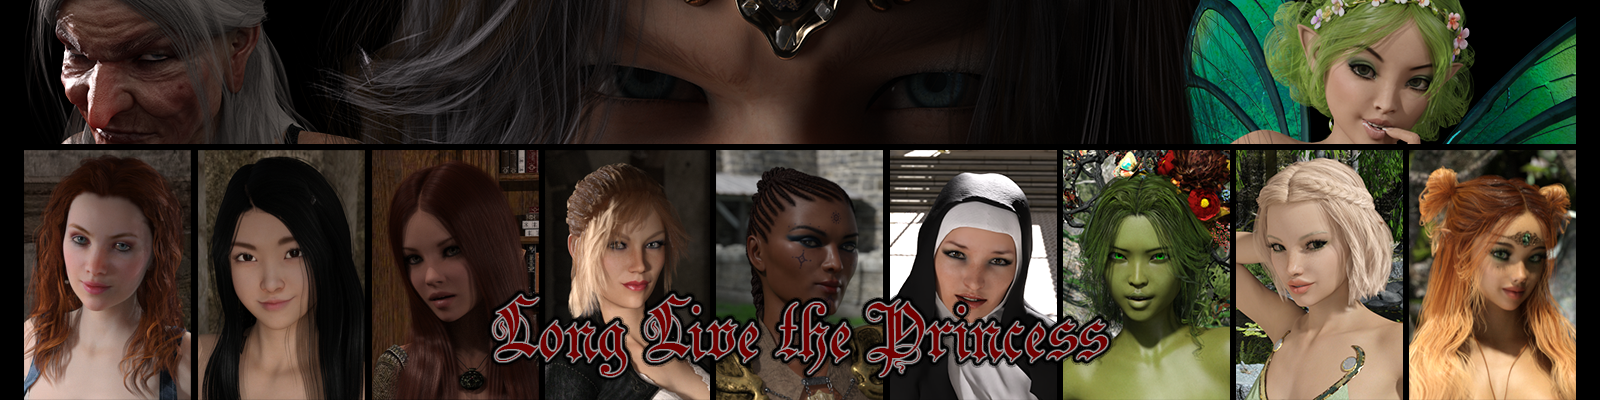 269839_Long_Live_the_Princess_Banner.png